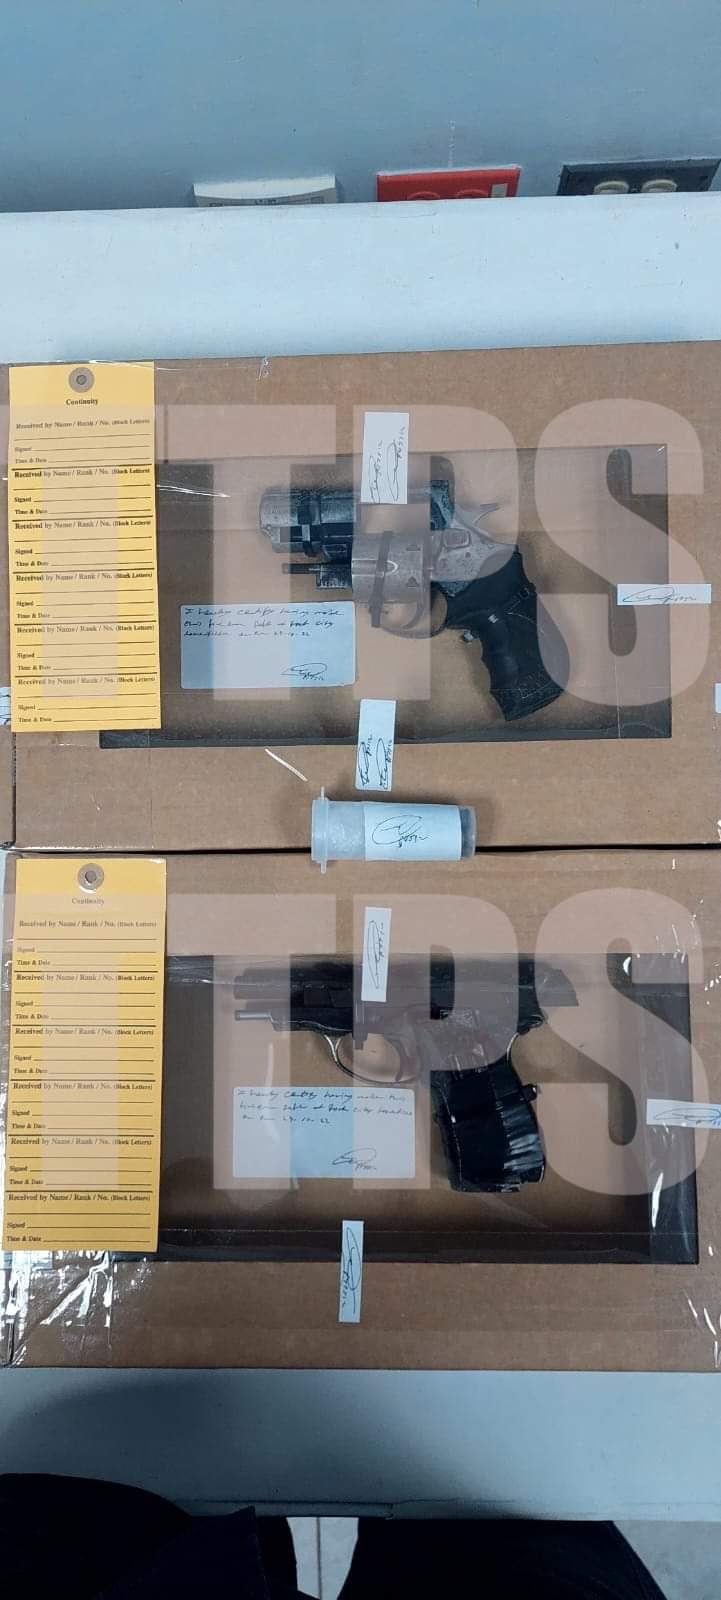 Two firearms and a quantity of ammo discovered in Laventille